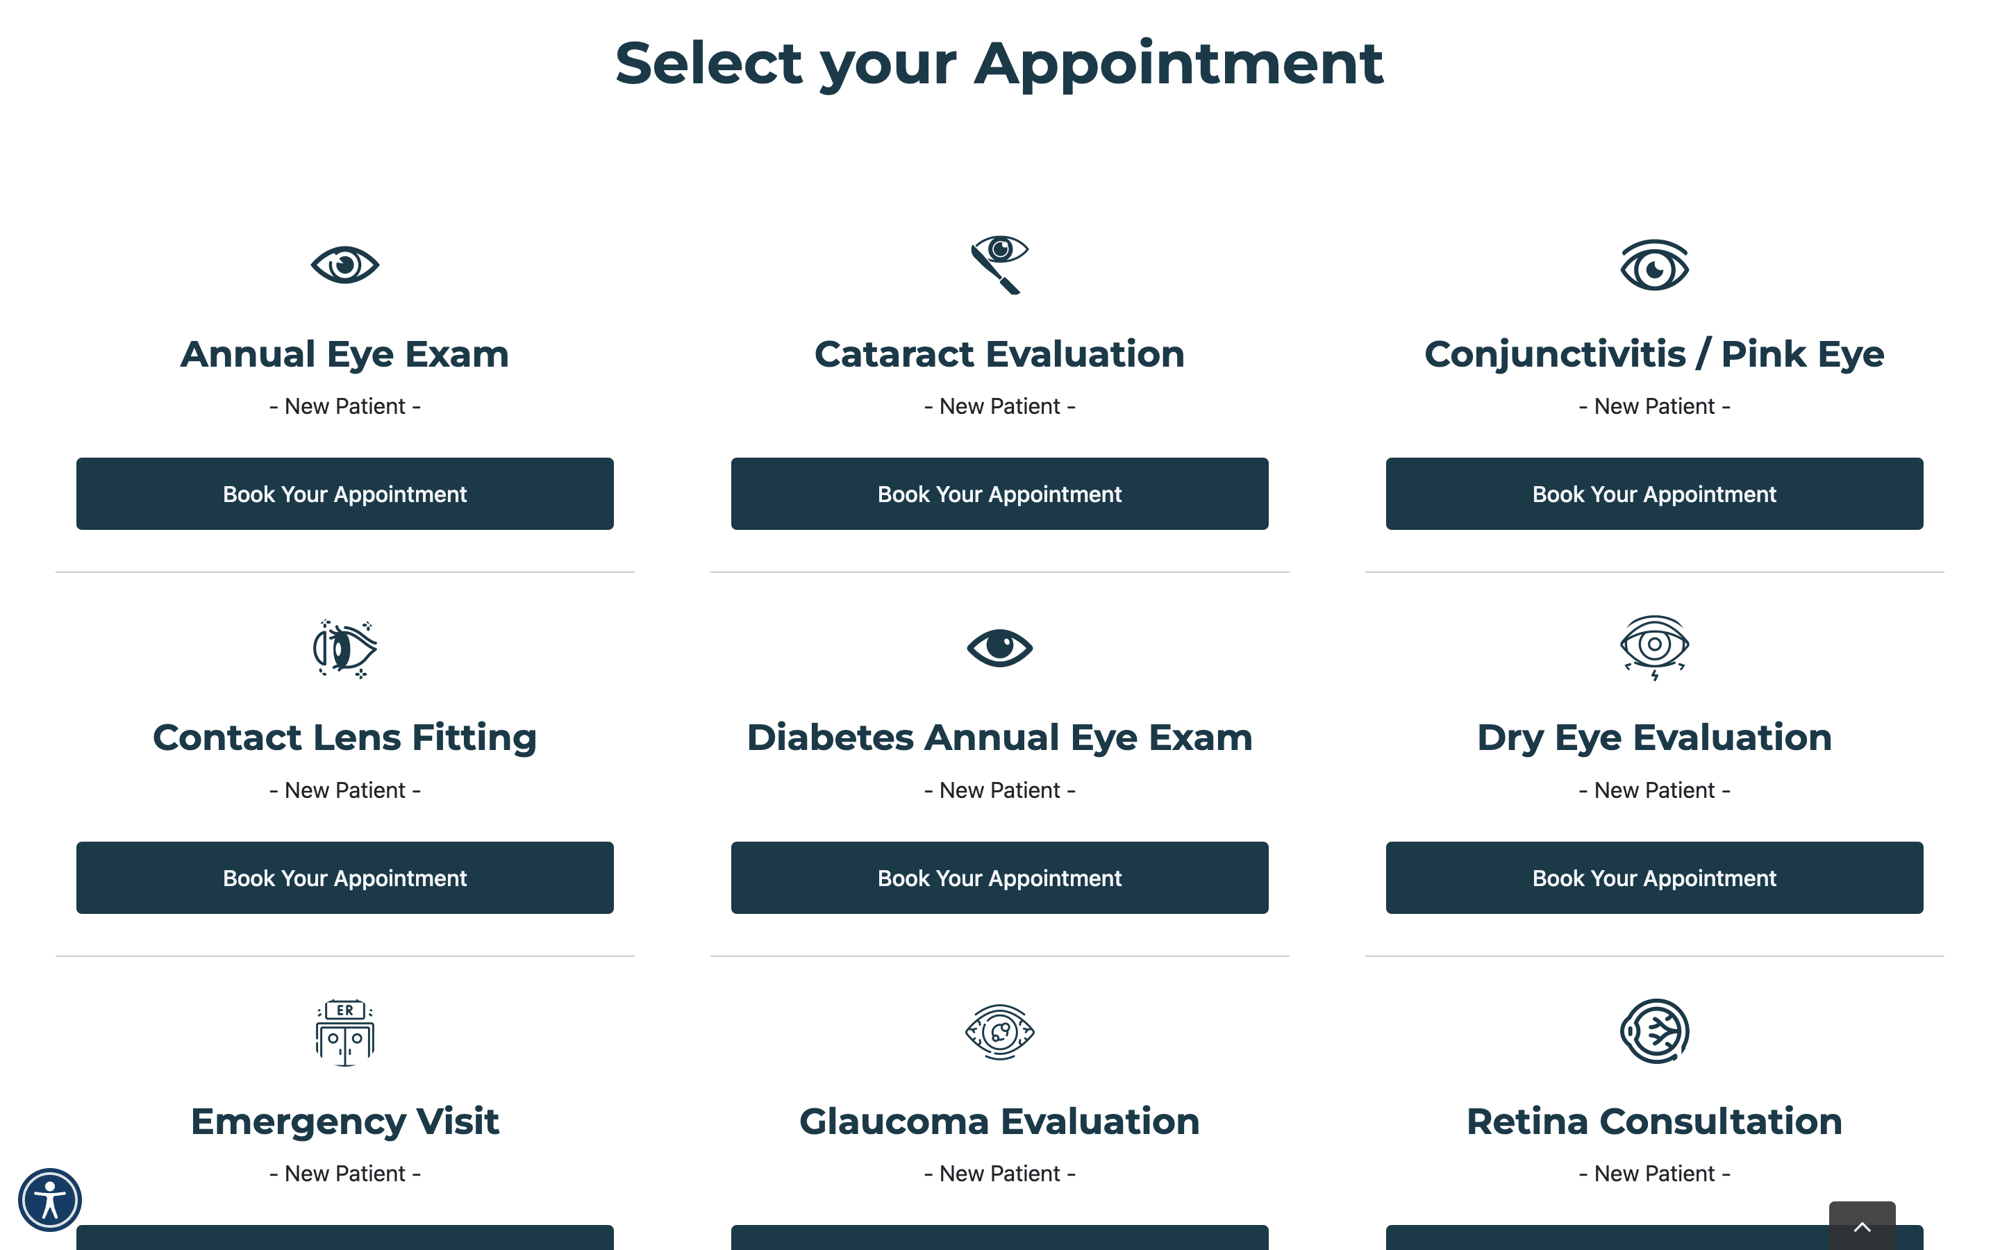 Patients book an appointment by visit reason